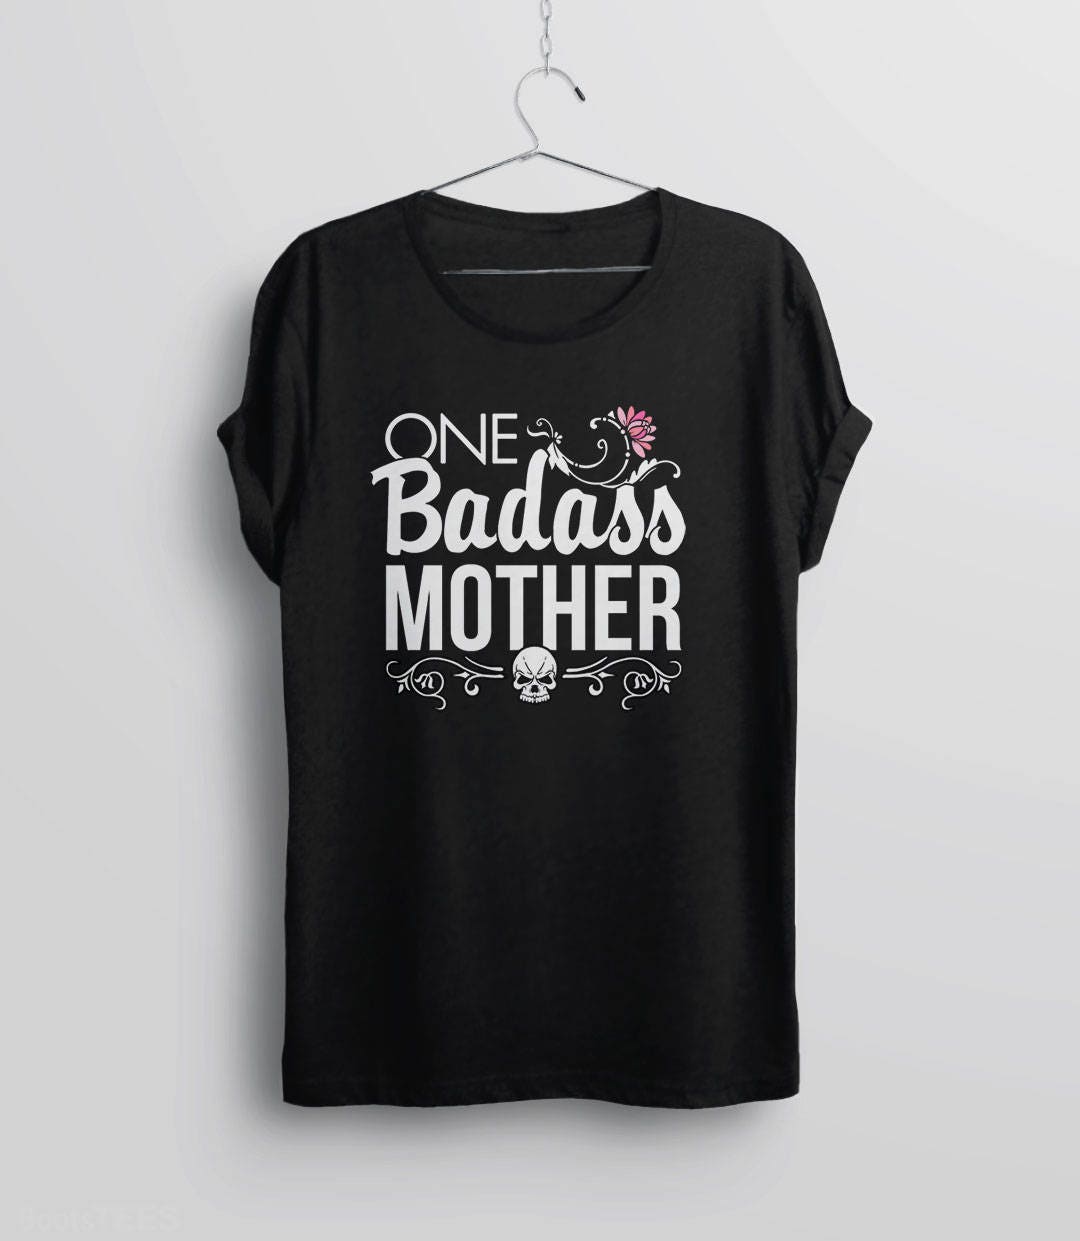 Mom shirt mother of boys shirt mom life mommin mothers day gift funny mom tshirt mother's day gift funny mom shirt gift for mom